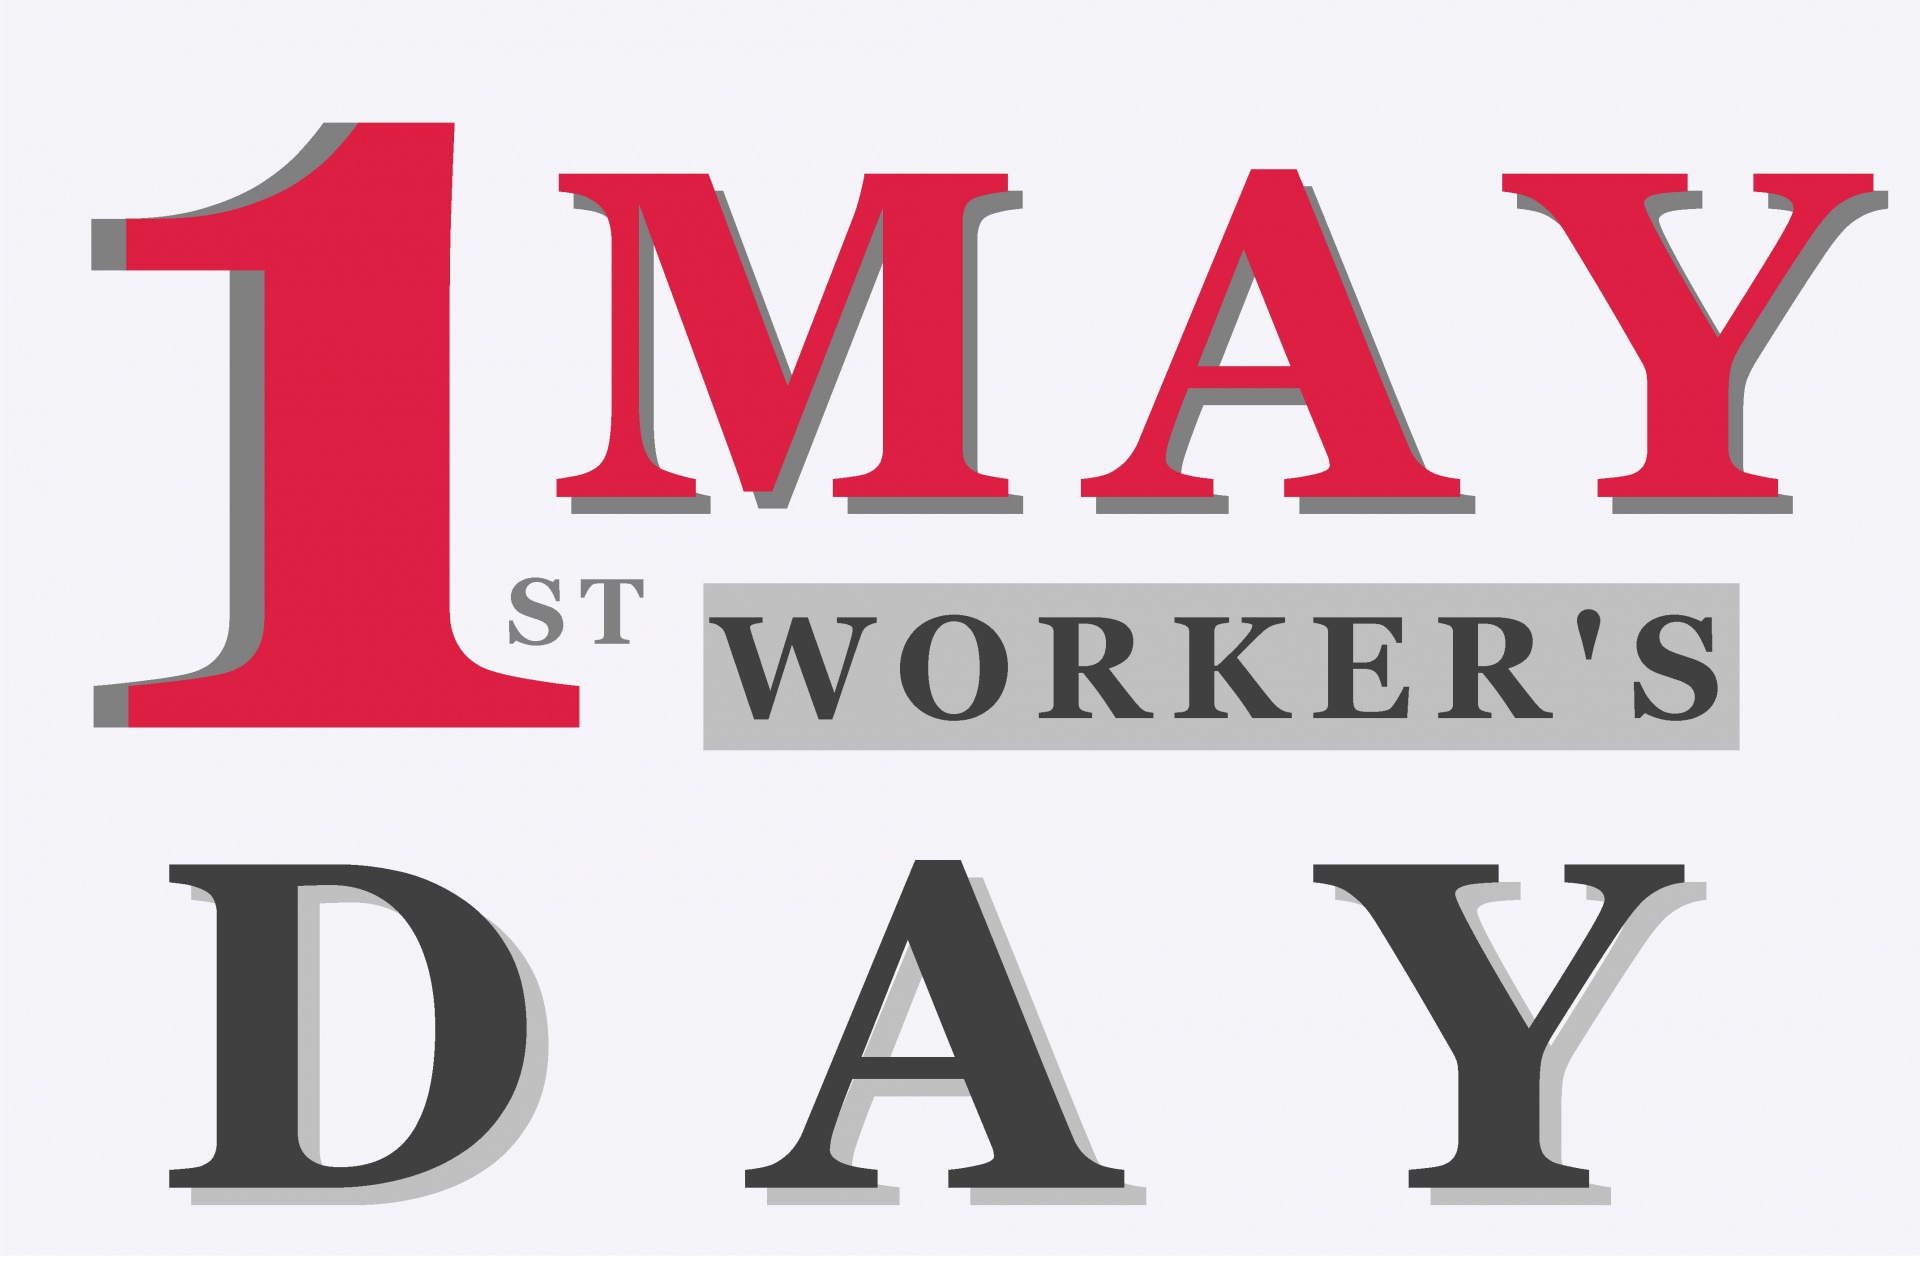 Happy 1st May Worker's Day